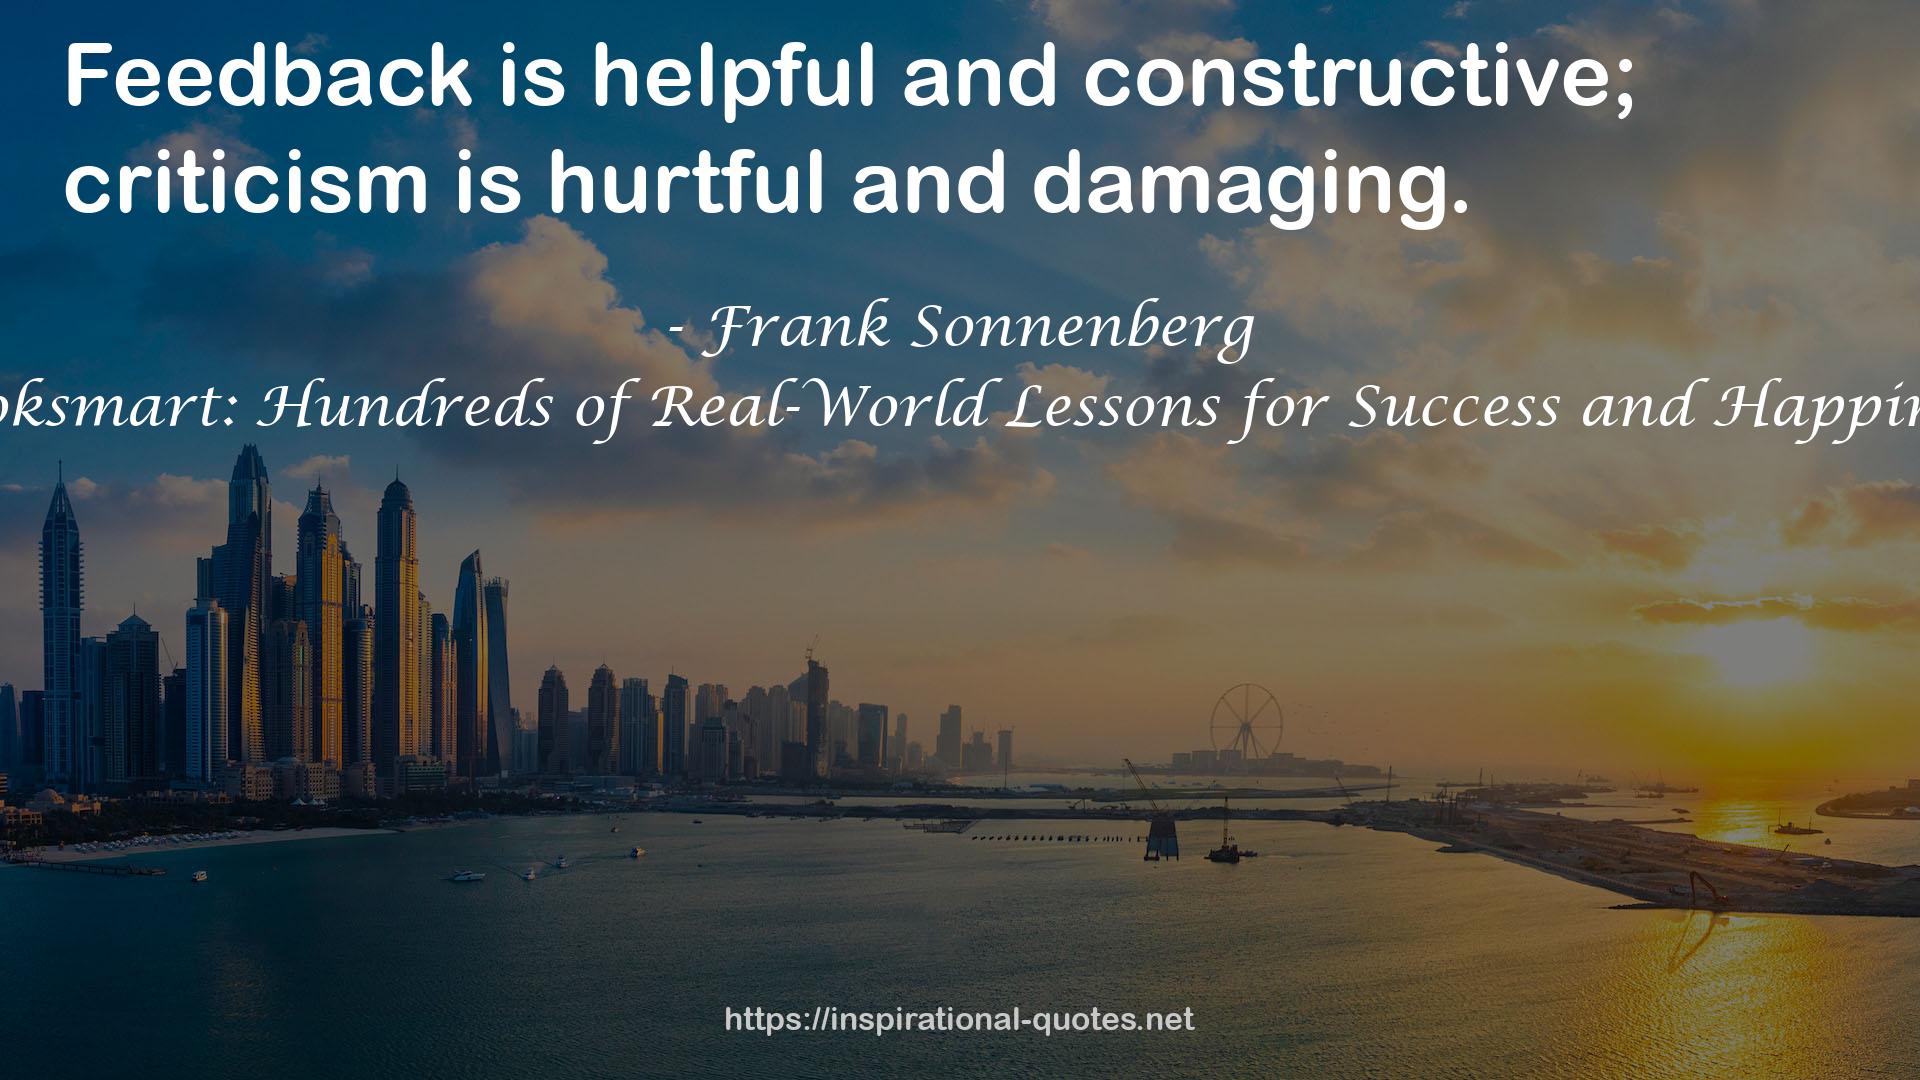 Booksmart: Hundreds of Real-World Lessons for Success and Happiness QUOTES